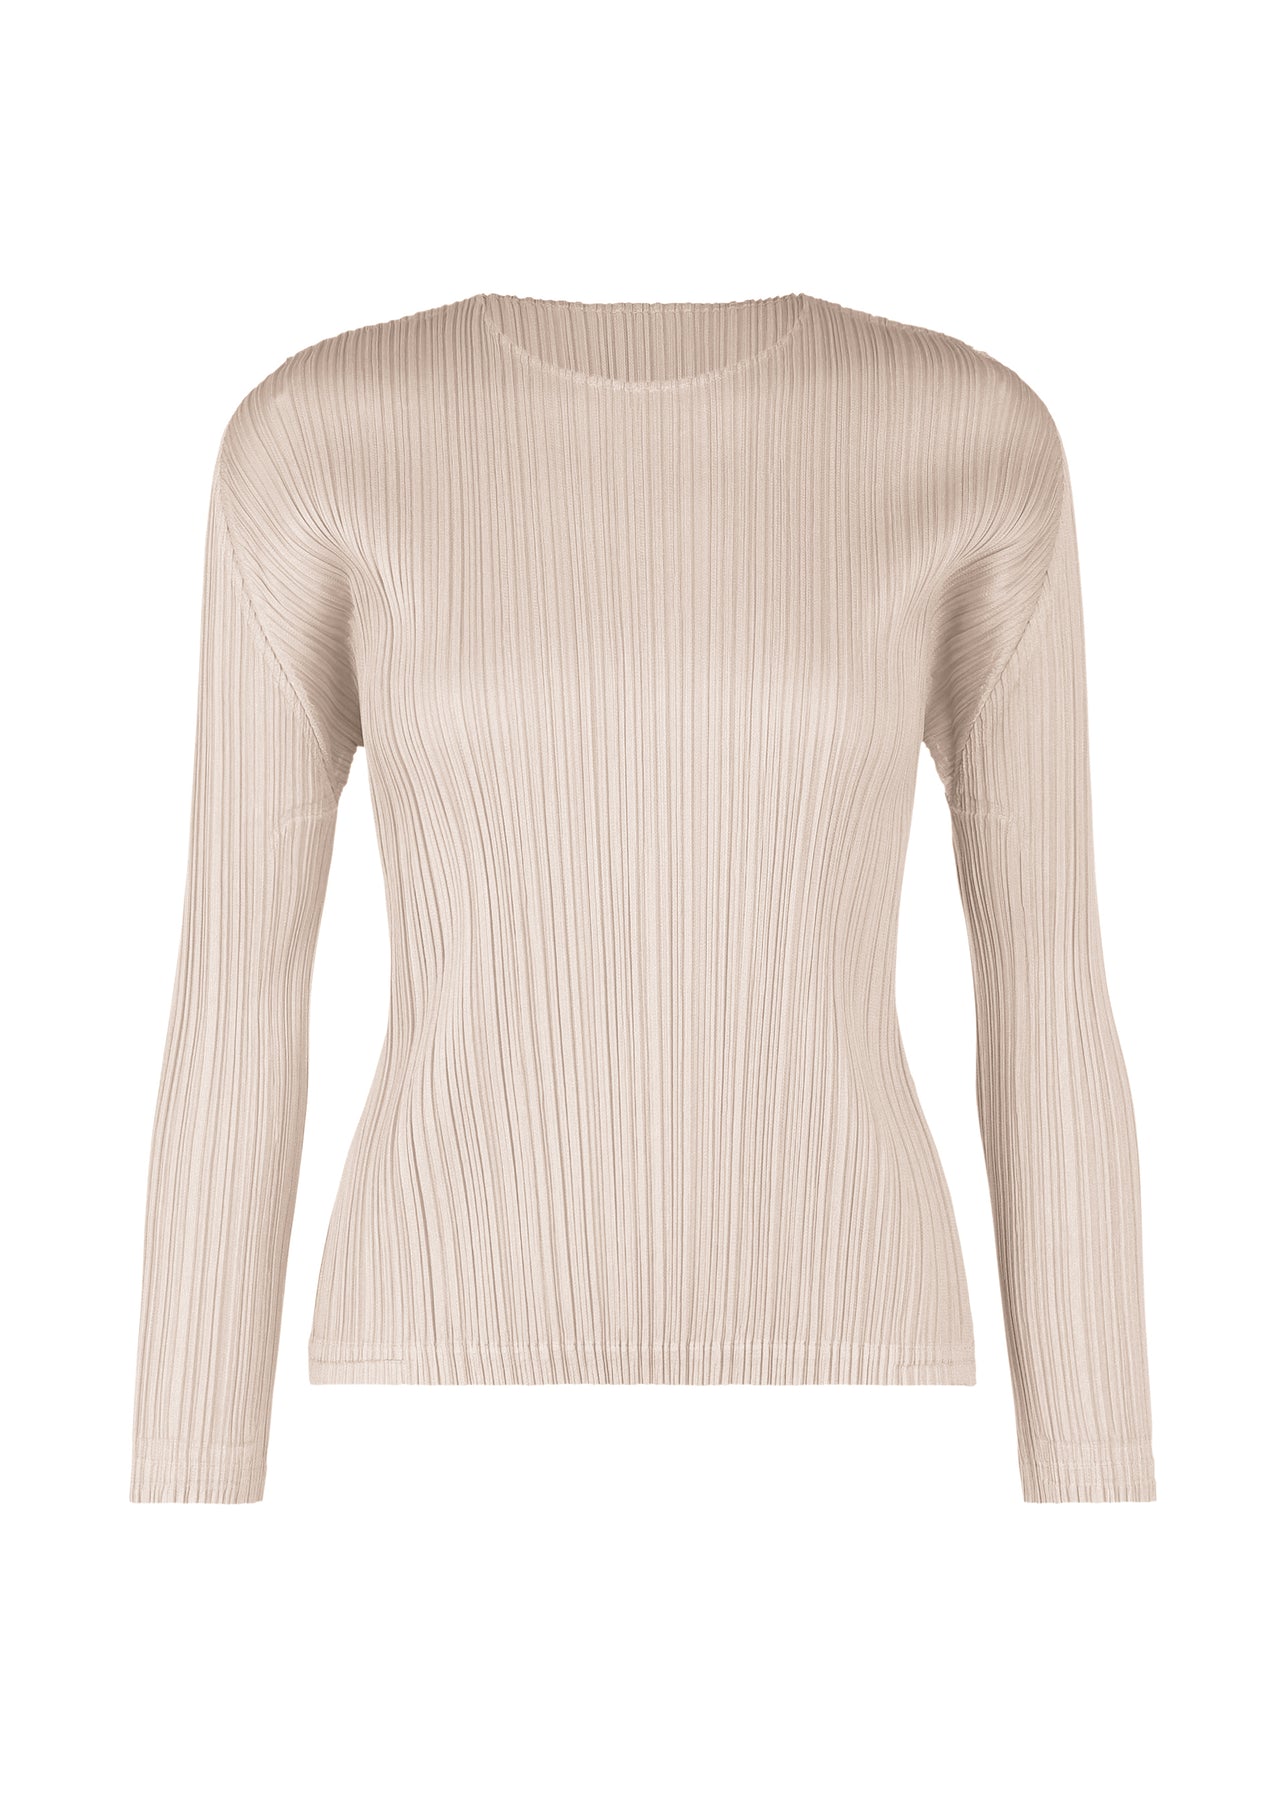 MONTHLY COLORS : DECEMBER TOP | The official ISSEY MIYAKE ONLINE